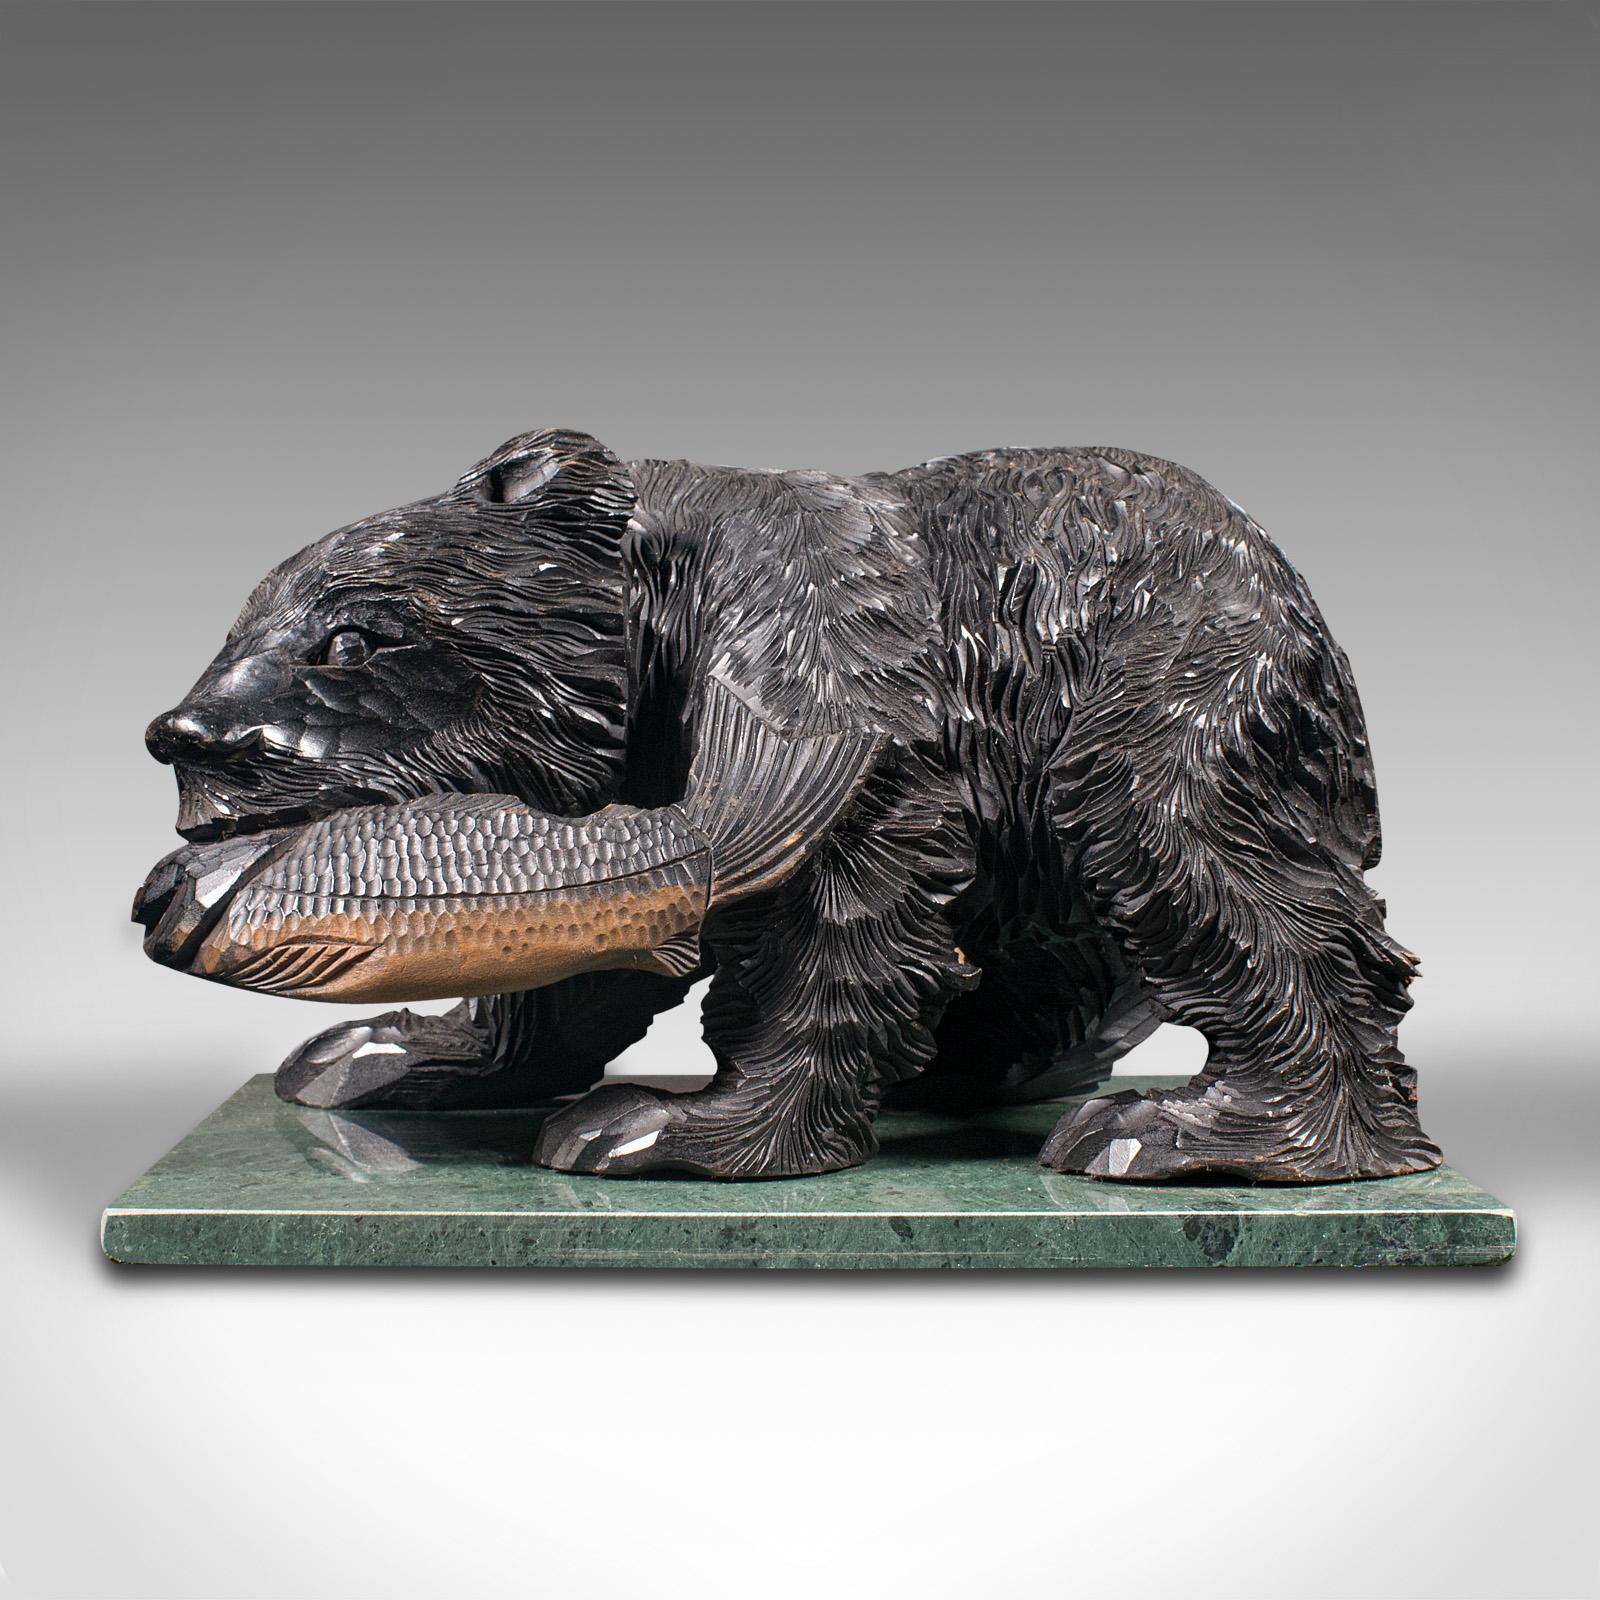 This is an antique decorative bear figure. A German, carved fruitwood natural study in the Black Forest taste, dating to the late Victorian period, circa 1900.

Enthusiastically carved and fascinating study of the large riverside